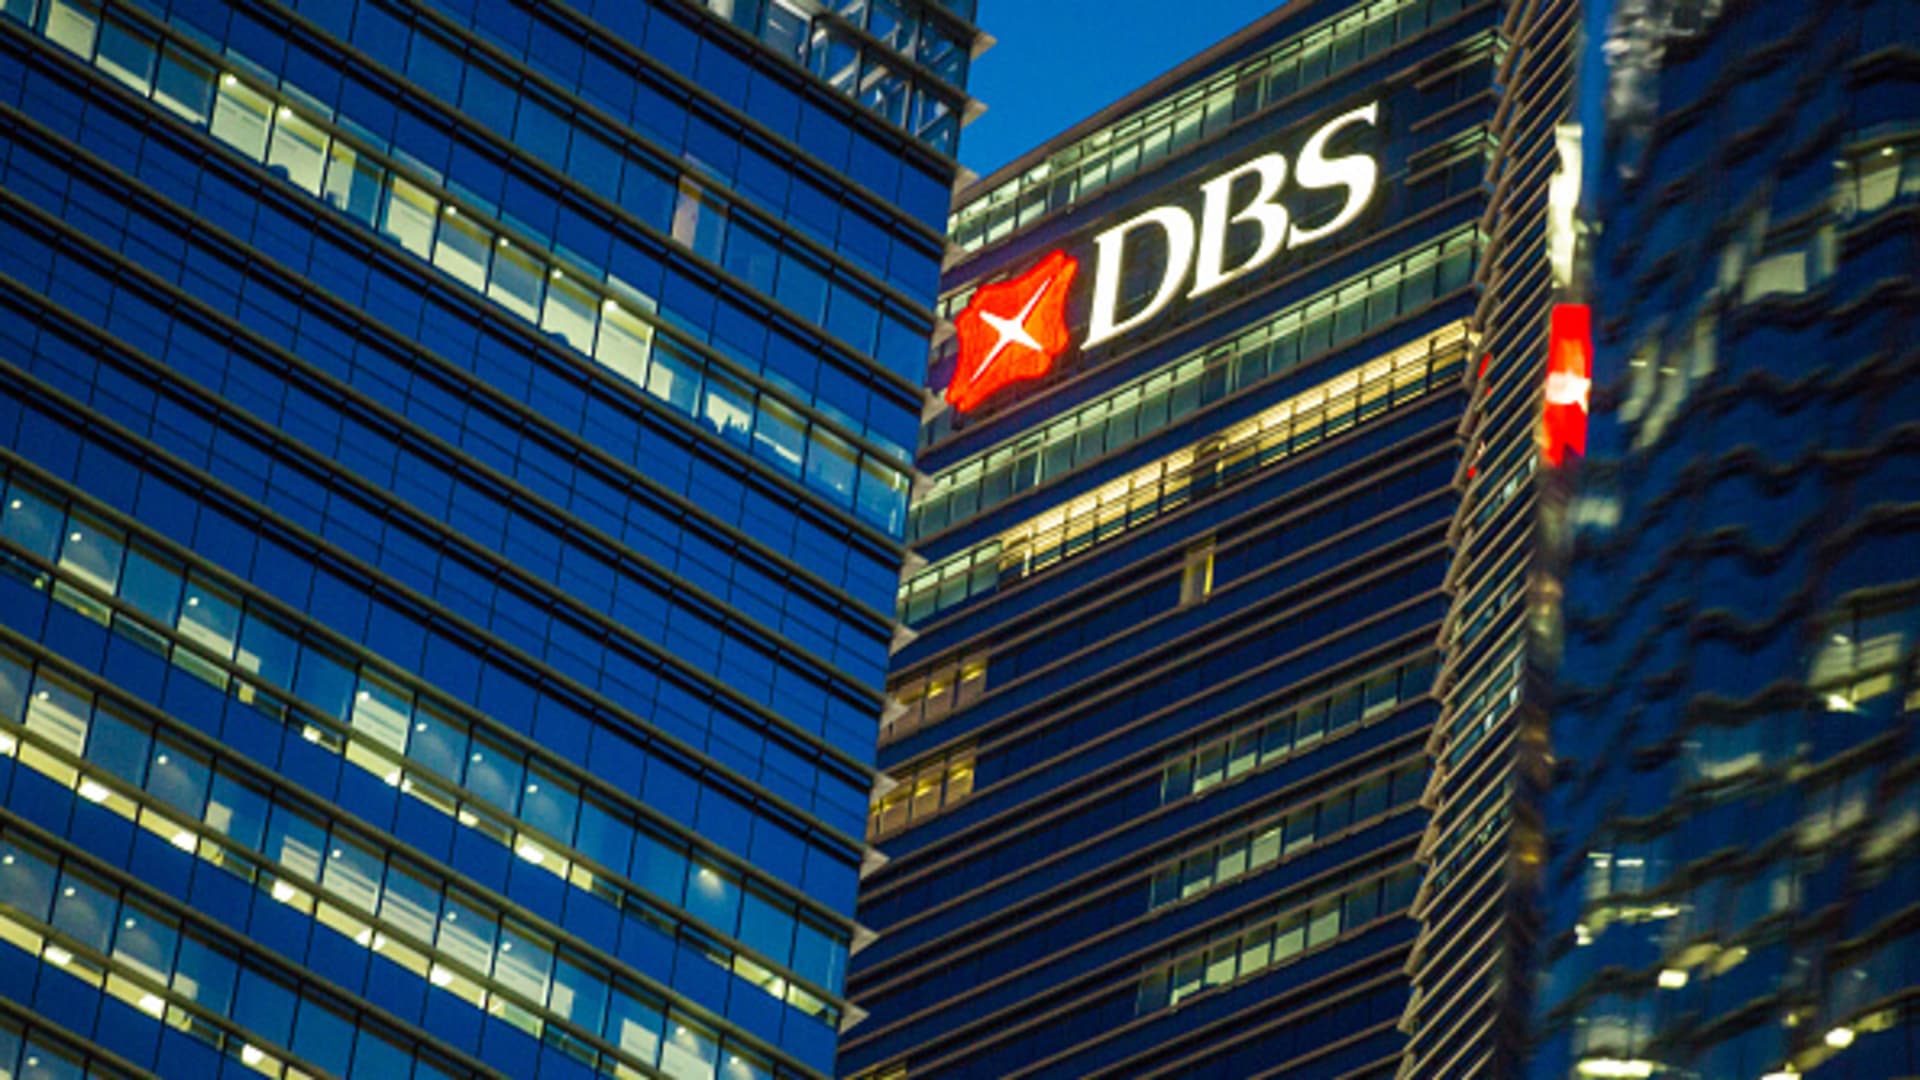 DBS Group Holdings in the central business district of Singapore.